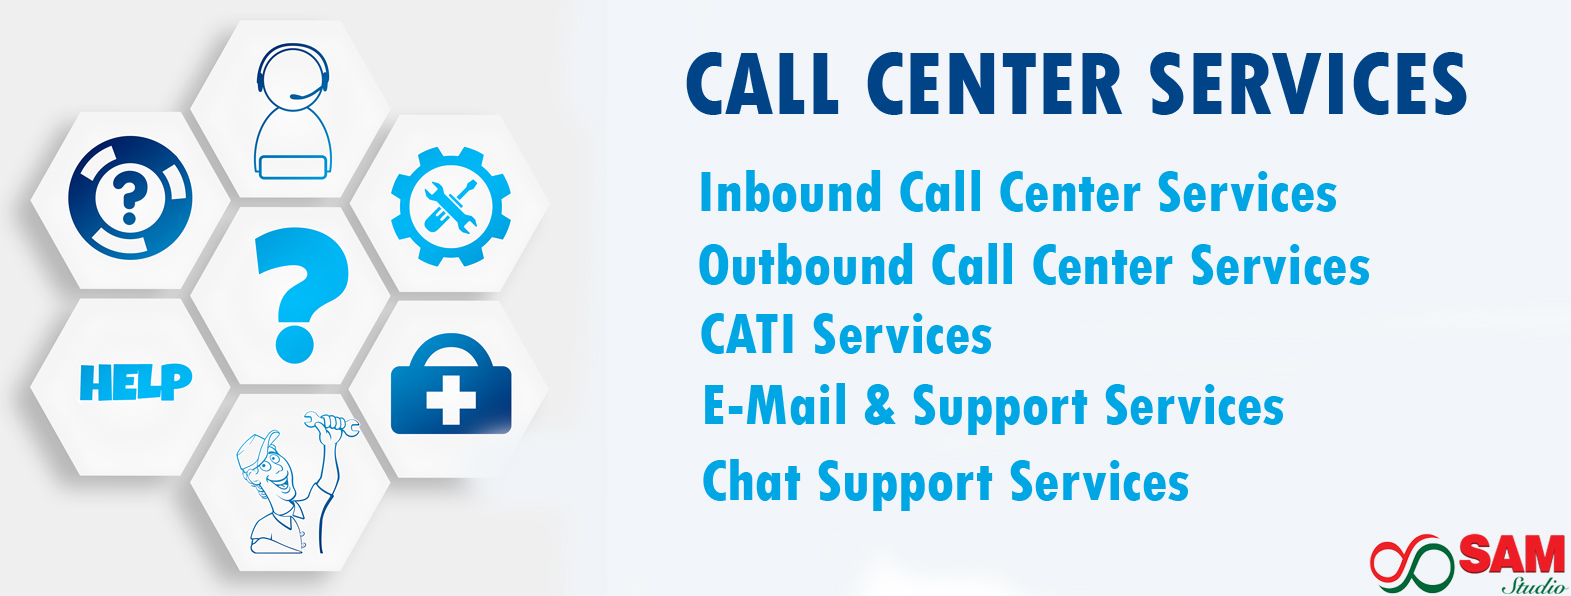 Outsource Call Center Services – Inbound, Outbound, CATI, Email Support Services